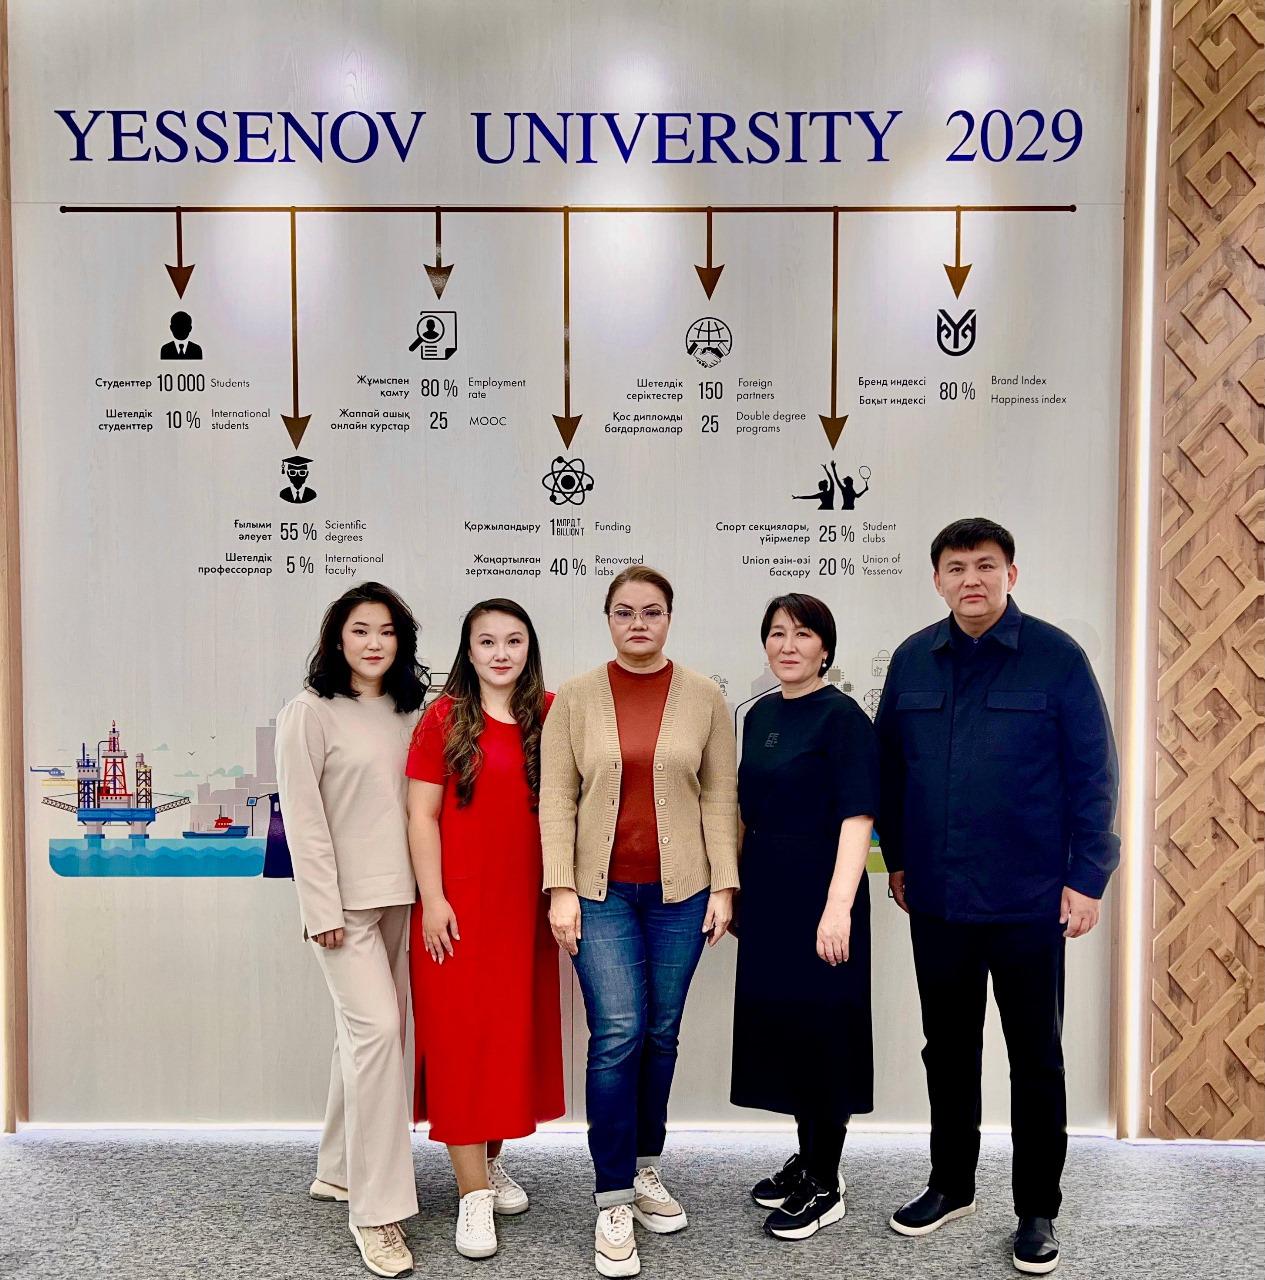 Members of the research group of the project "Victimological problems of prevention of domestic violence" of the Department of Criminal Law, Criminal Procedure and Criminalistics visited the Museum of History of the Caspian University of Technology and Engineering named after Sh.Yesenov